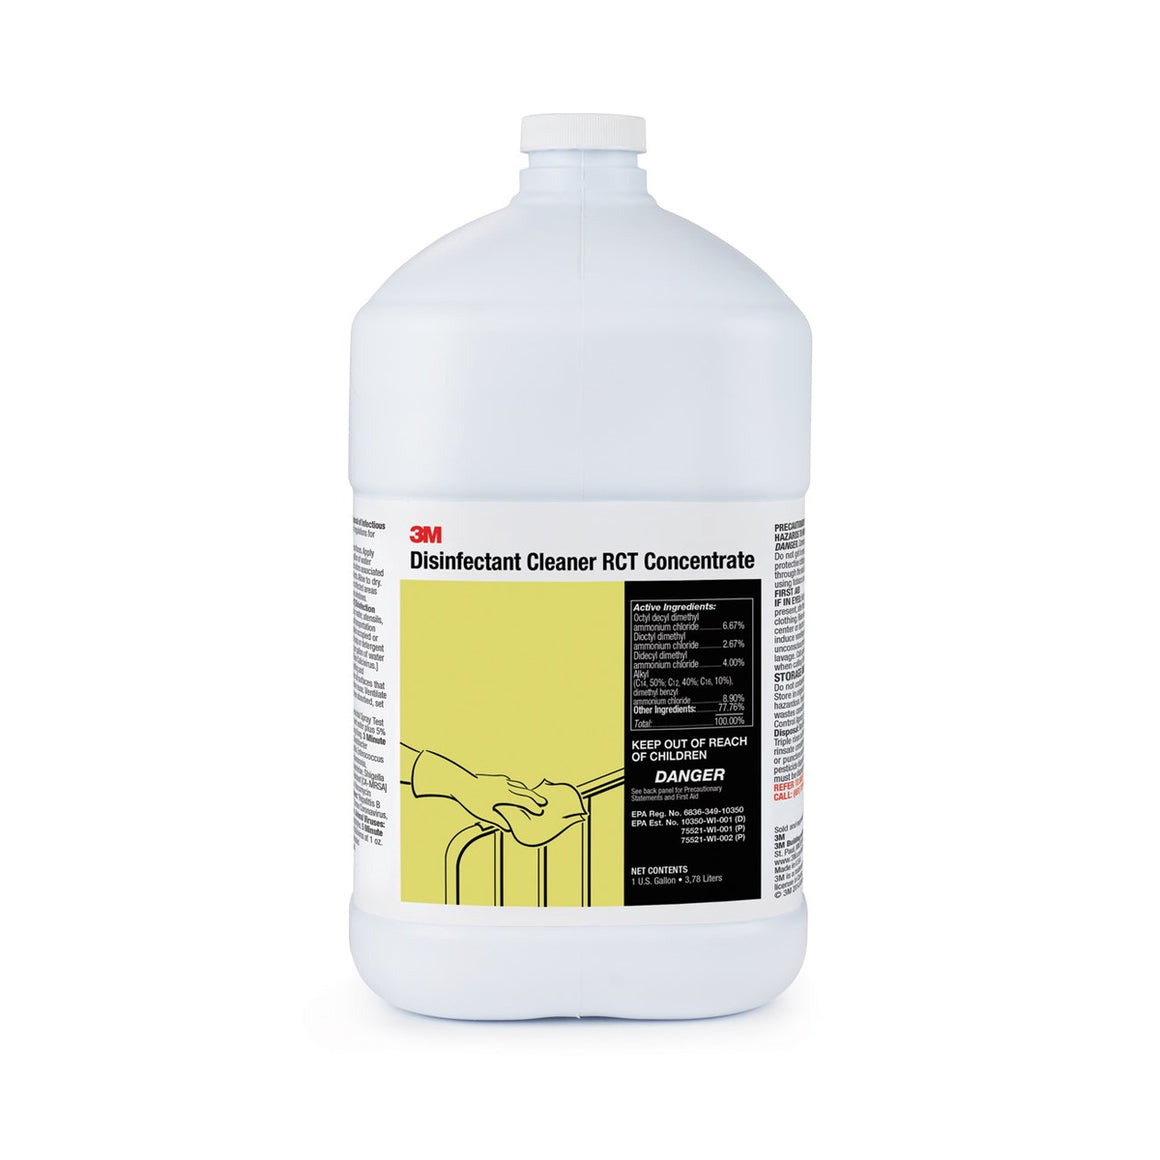 3M Disinfectant Cleaner RCT Concentrate, Fragrance Free And Dye Free